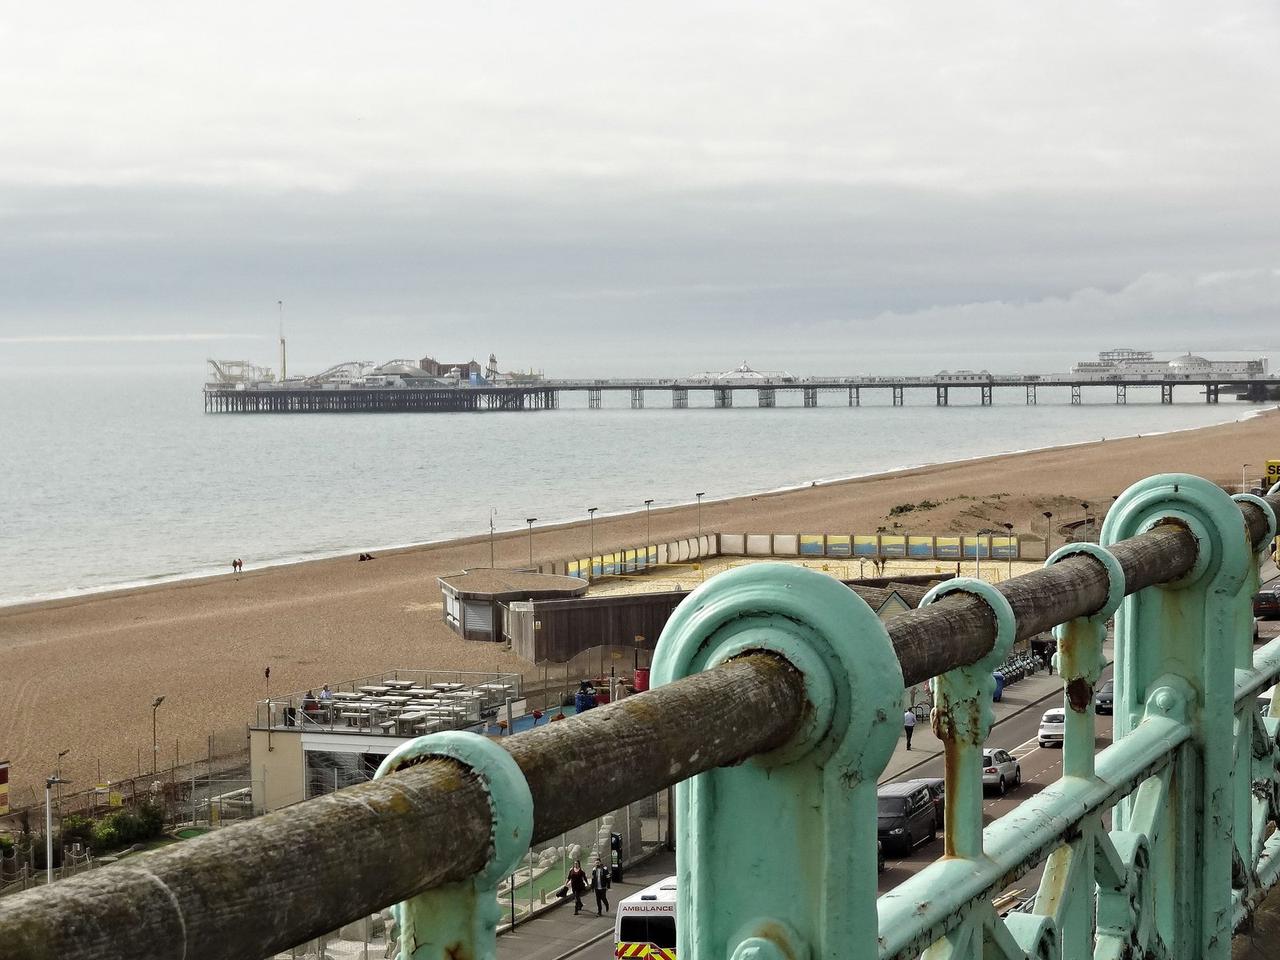 Darling-by-the-Seaside, Brighton & Hove Images - 15